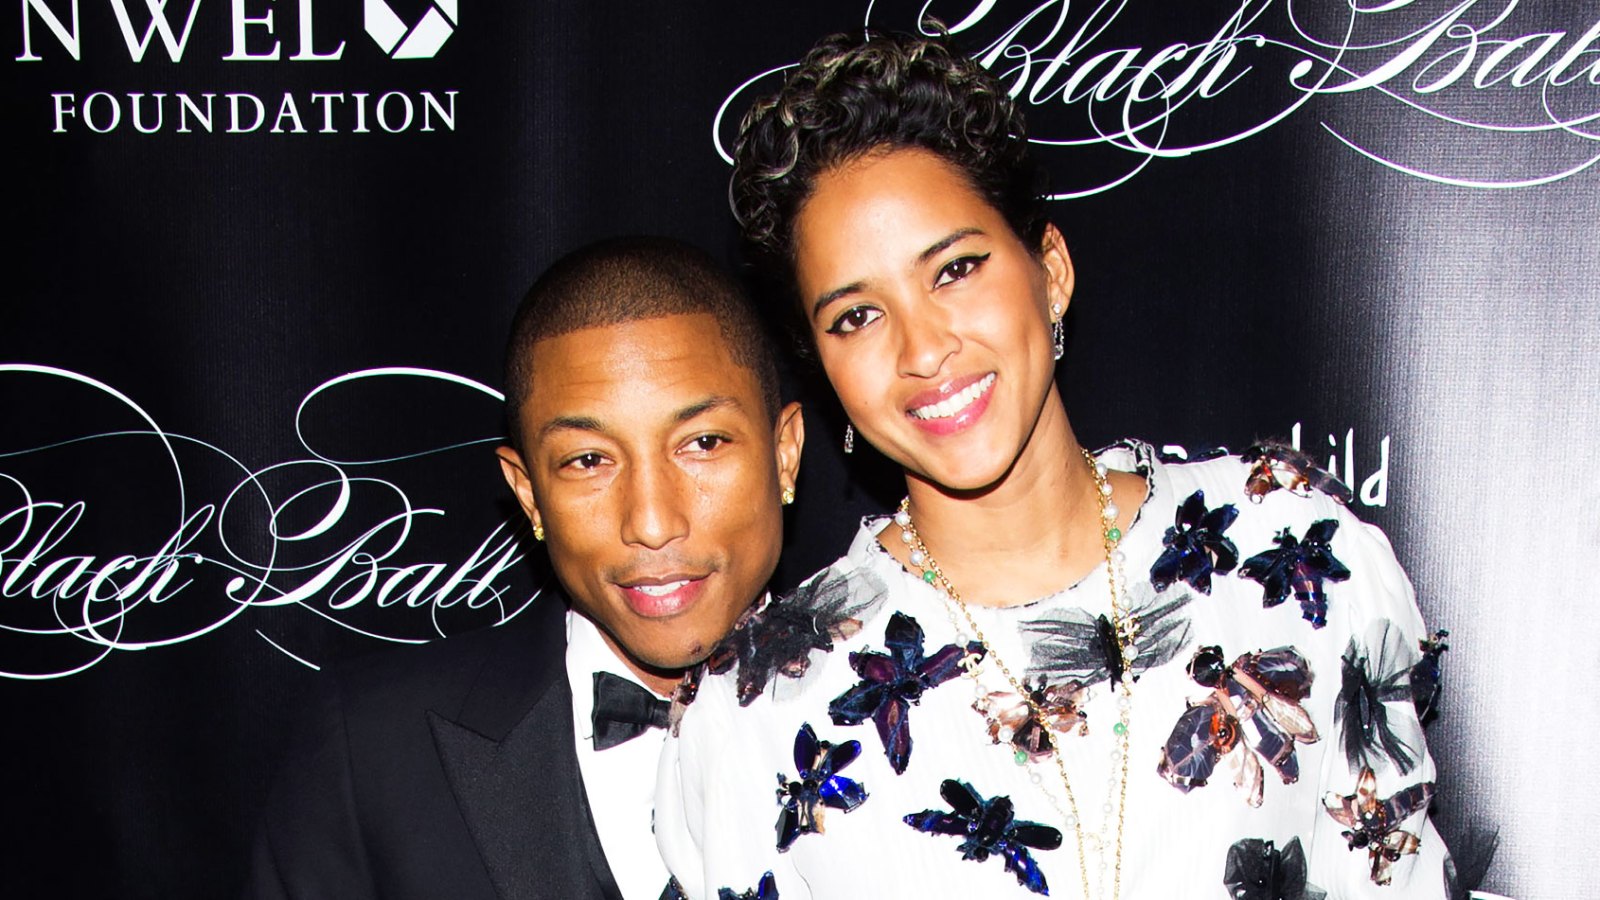 Pharrell-Williams-Marries-Helen-Lasichanh-Usher-and-Busta-Rhymes-Perform-All-the-Details-Pharrell-Williams-and-Helen-Lasichanh